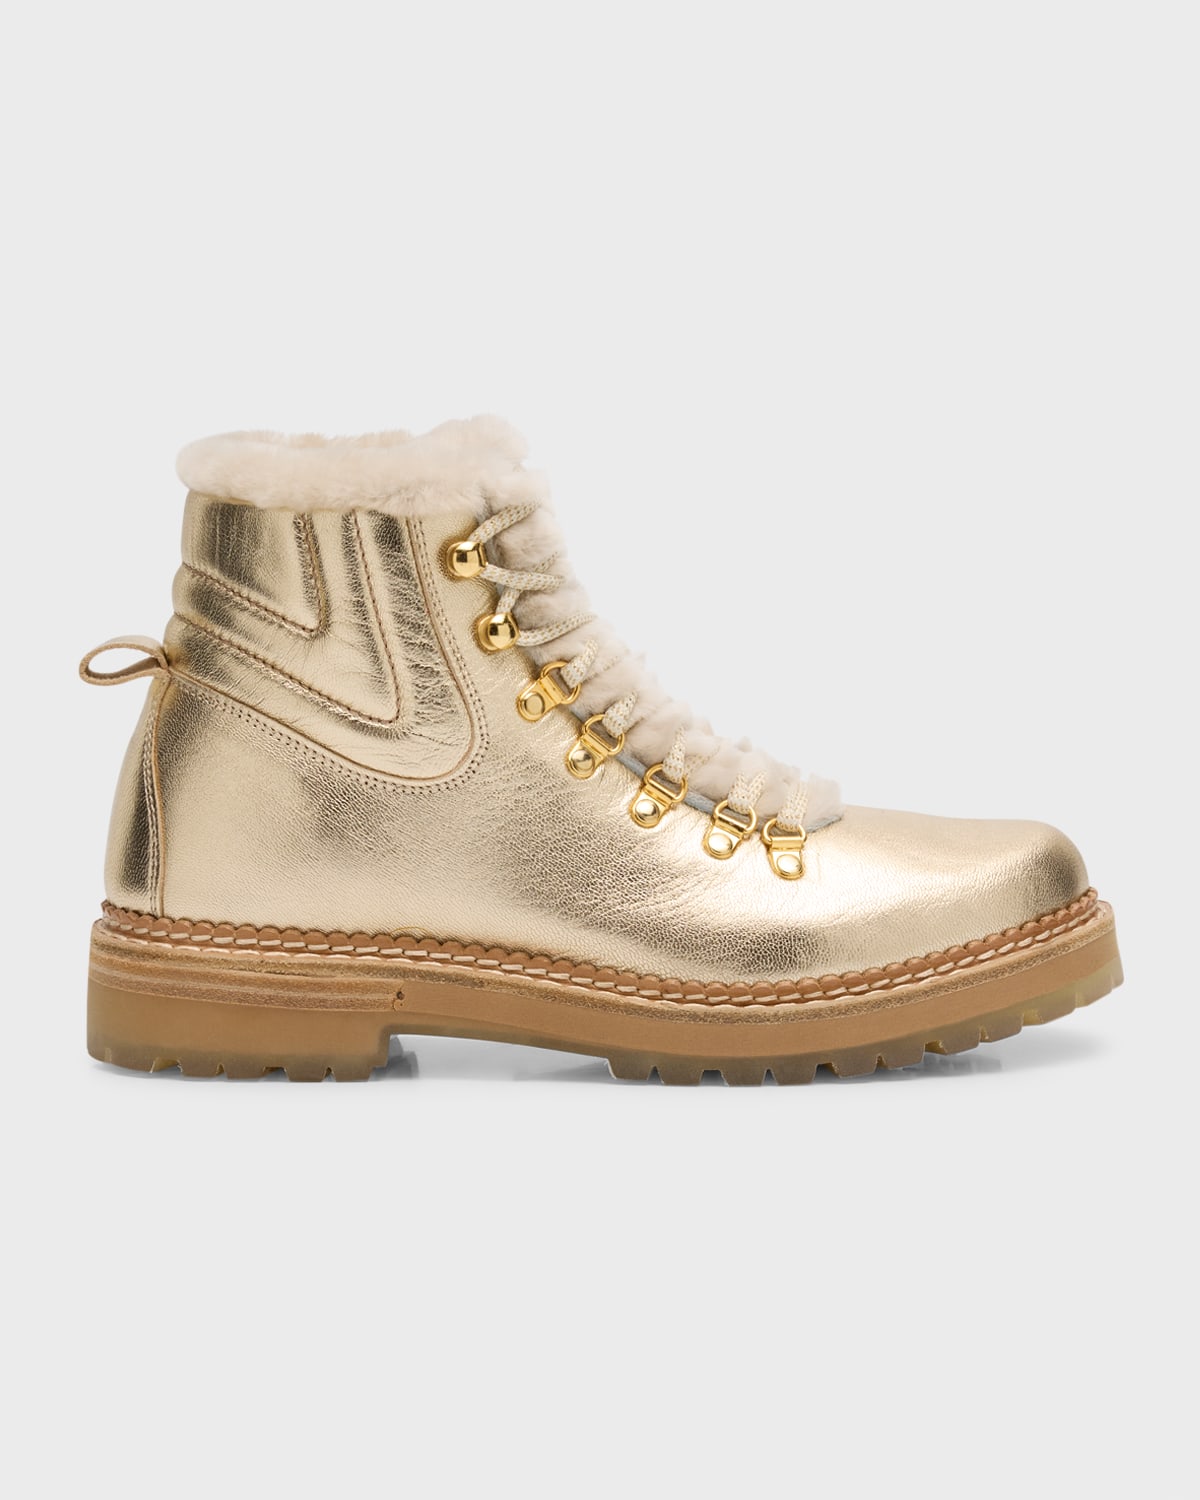 Metallic Leather Shearling-Lined Hiking Boots